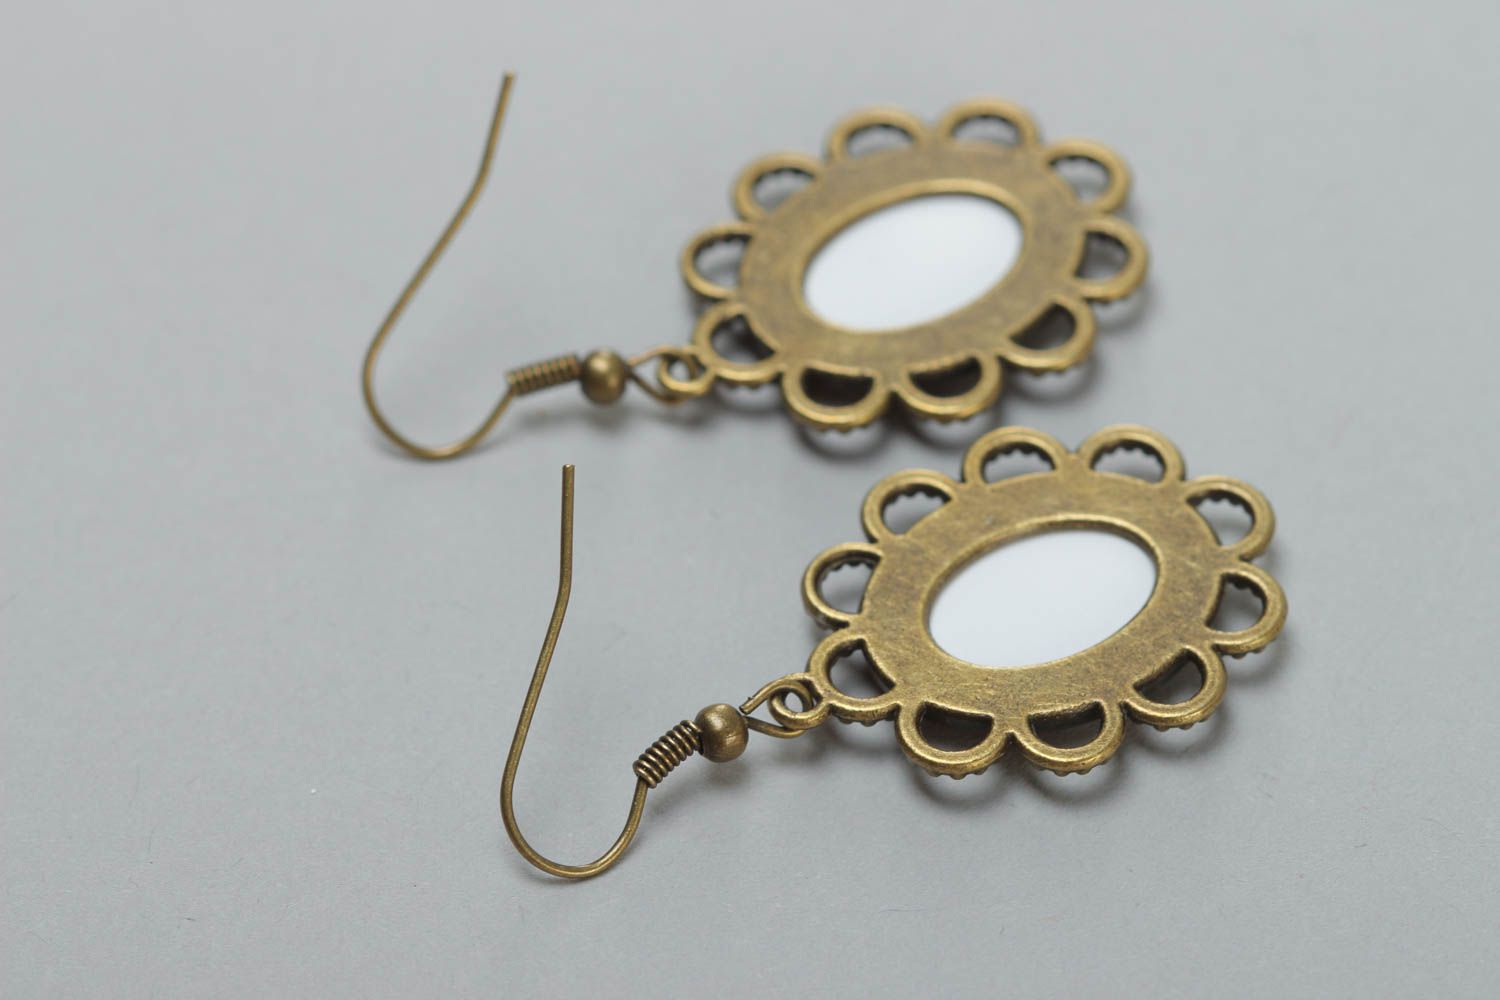 Handmade oval dangling earrings with lacy metal basis and poppy flowers image photo 4